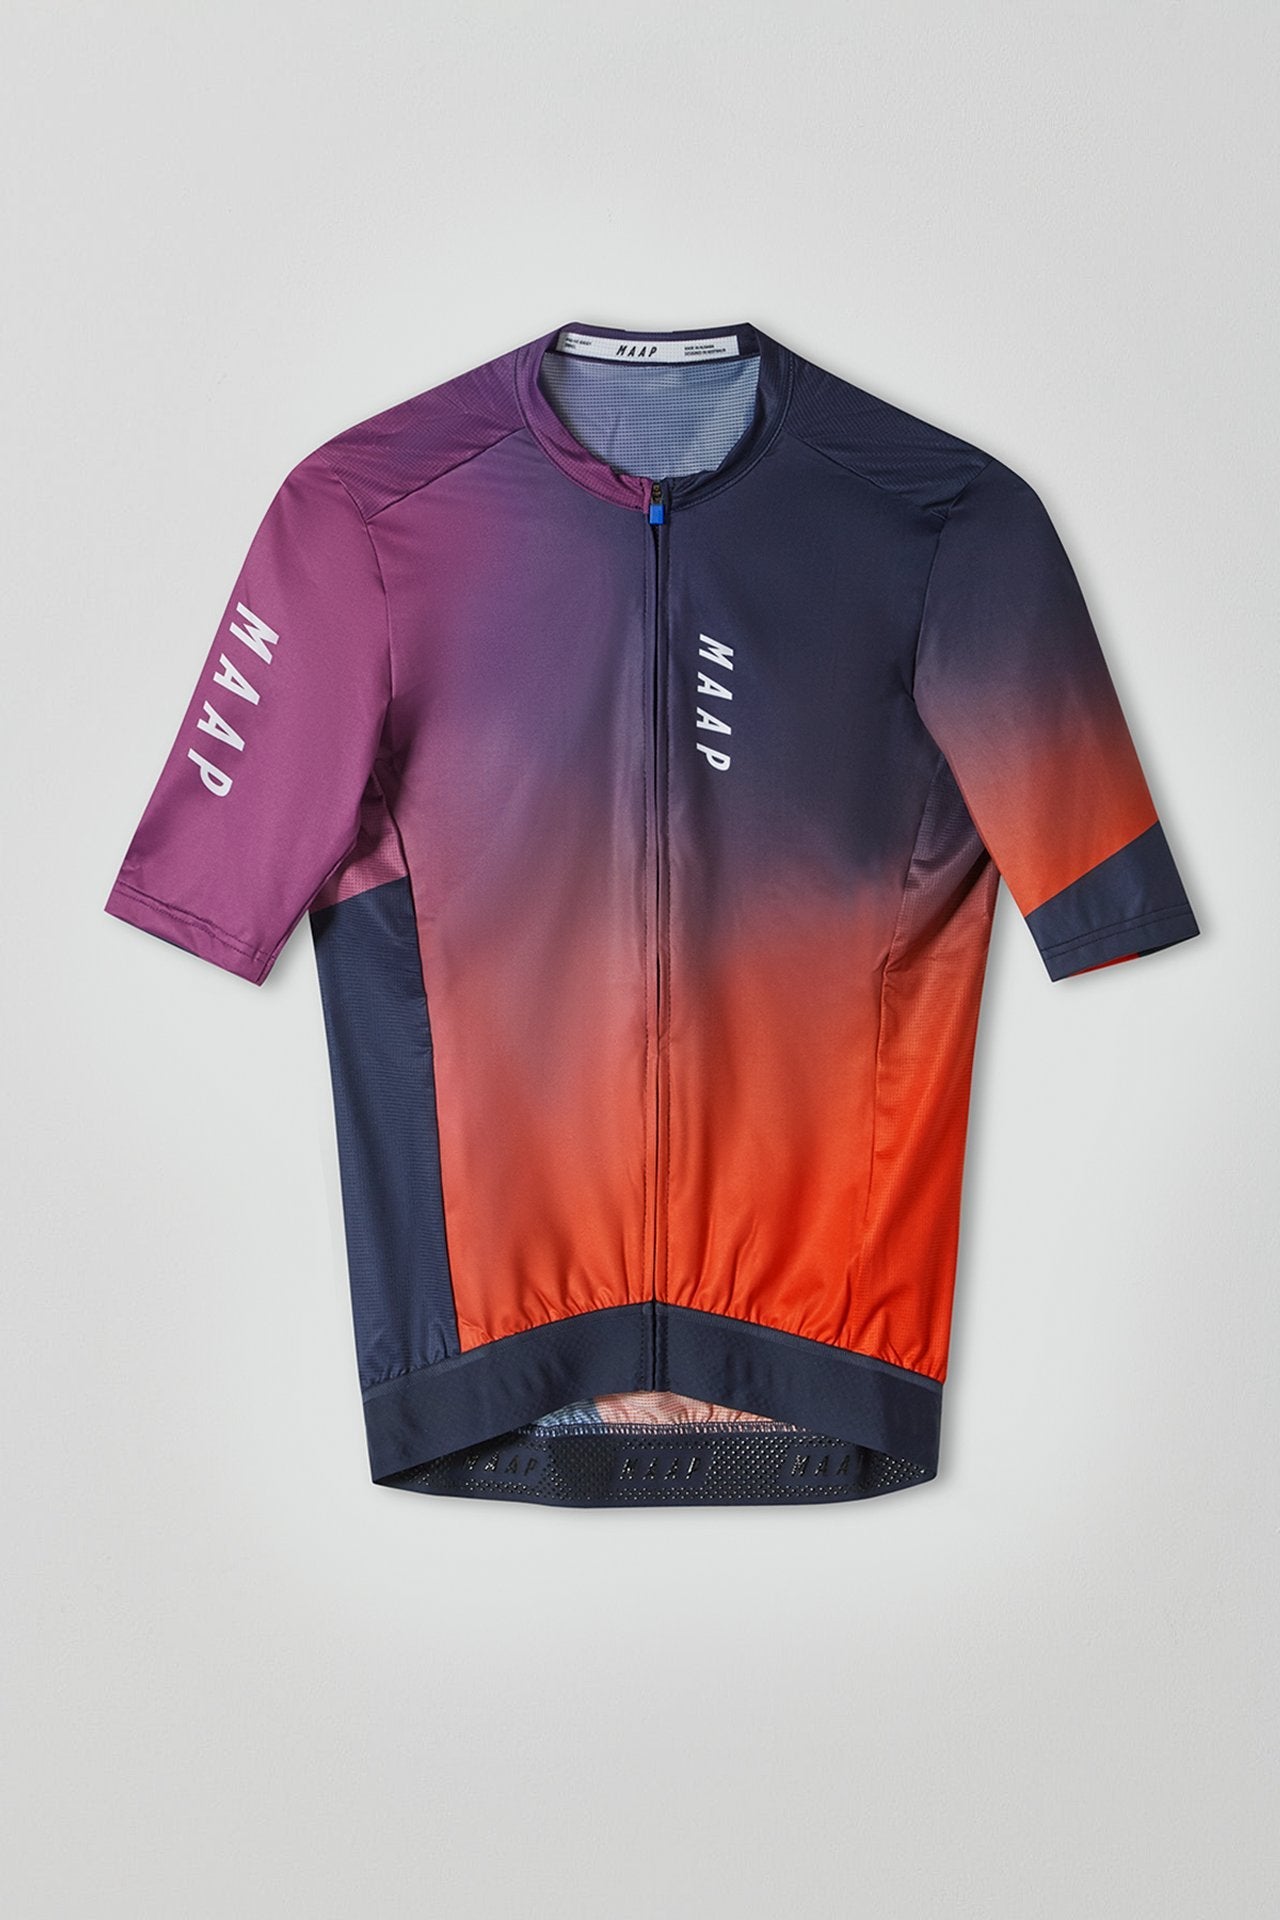 Flare Pro Fit Jersey - MAAP Cycling Apparel